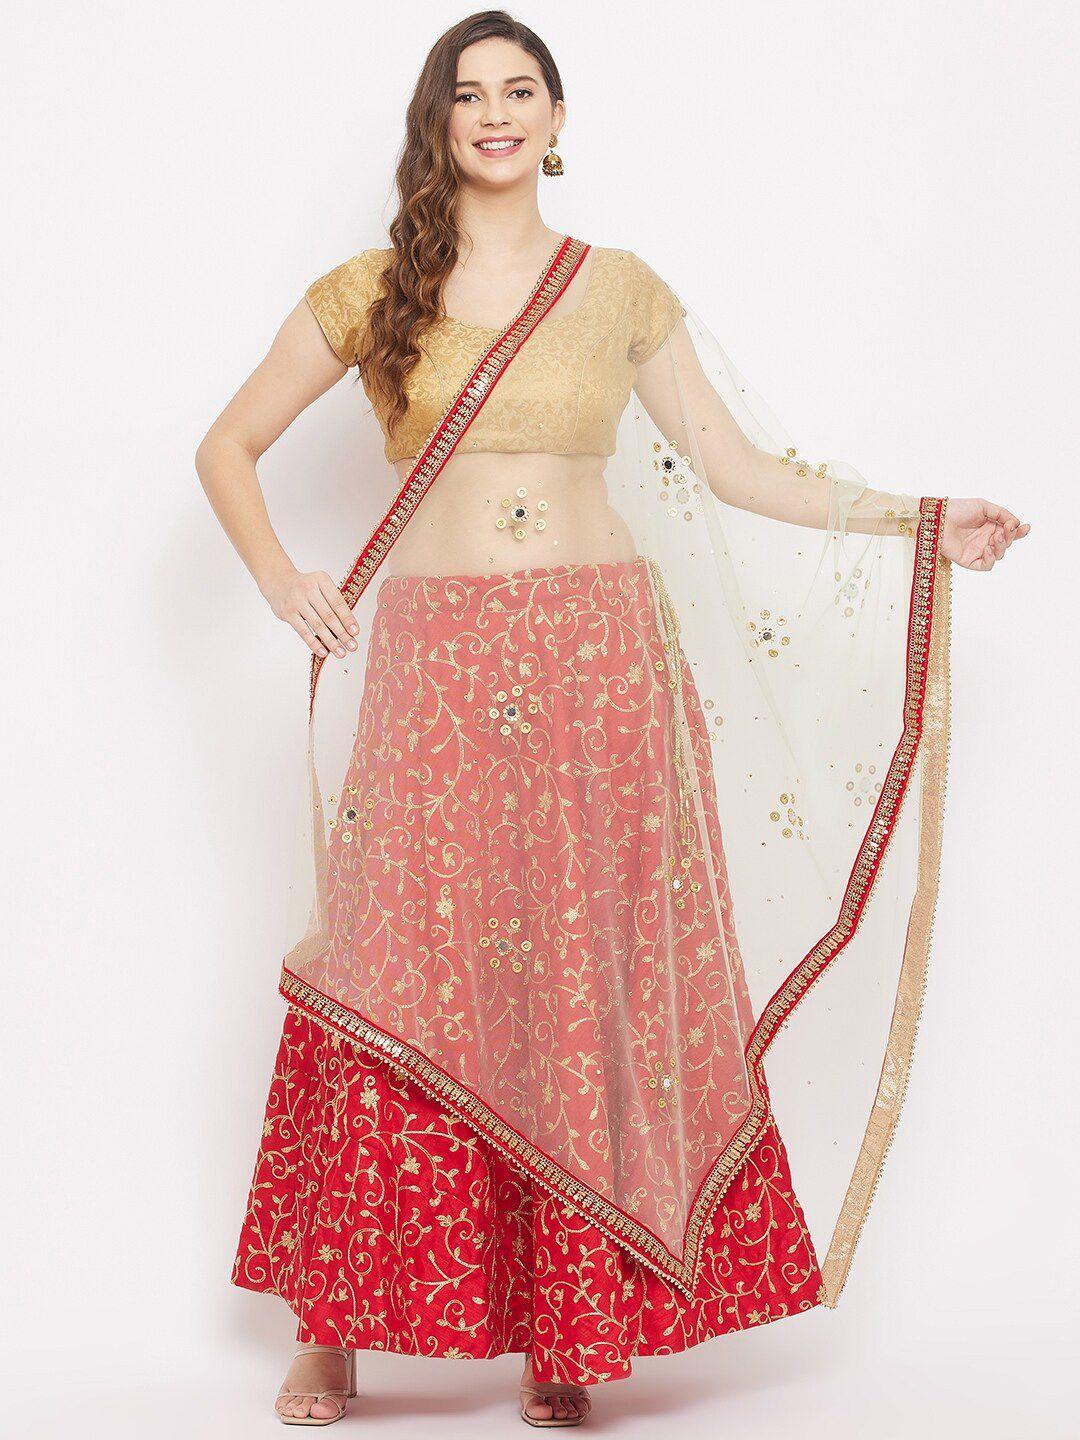 clora creation gold-toned & red ethnic motifs embroidered dupatta with beads and stones